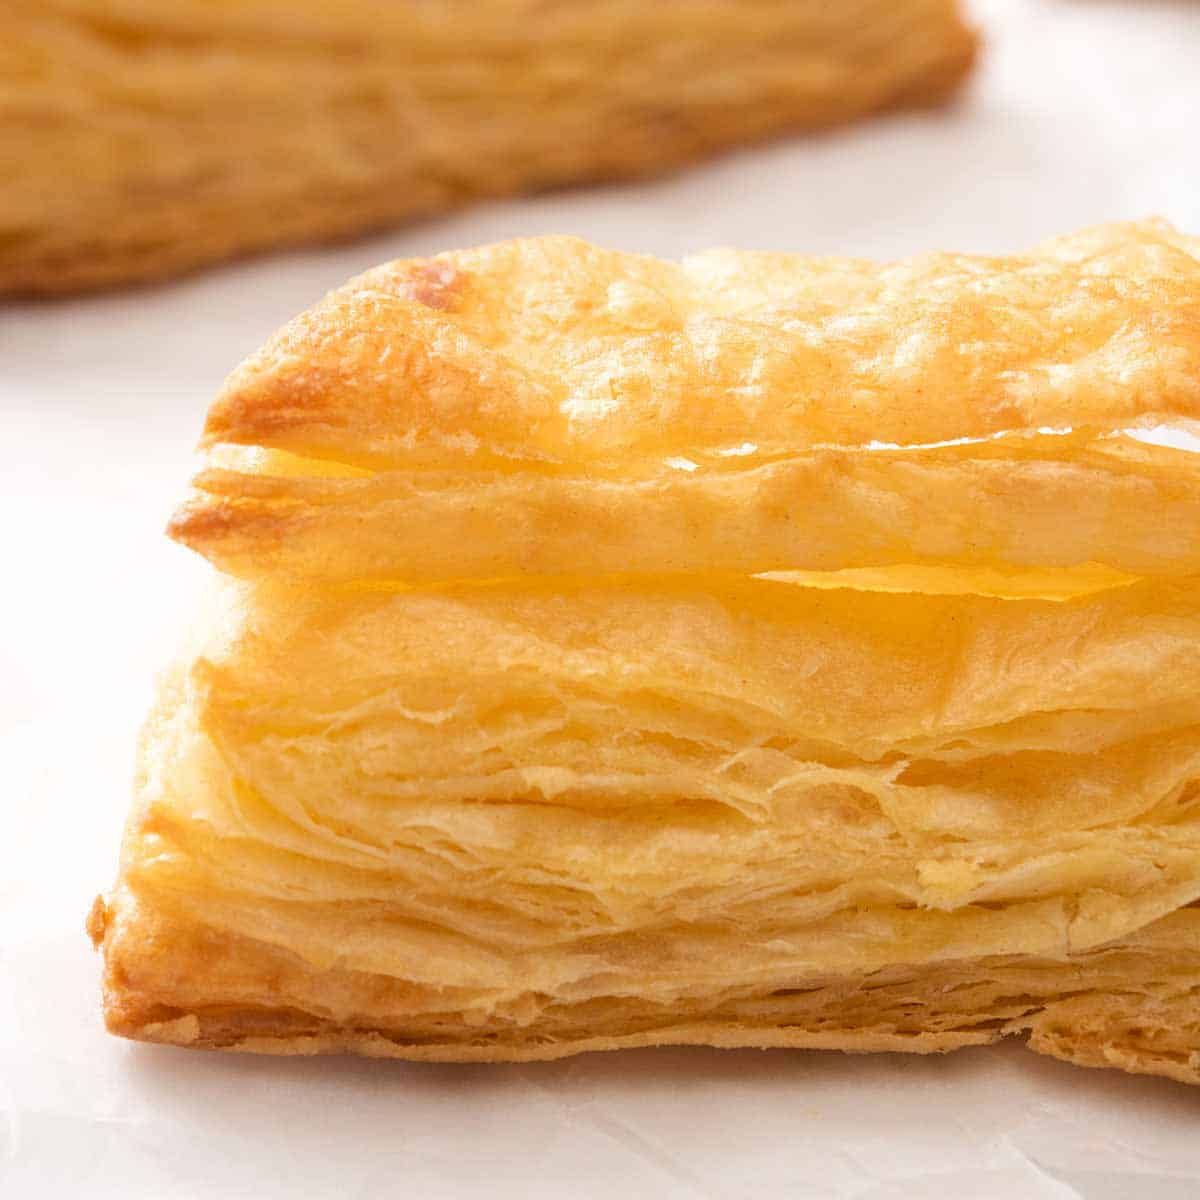 How to prepare puff pastry